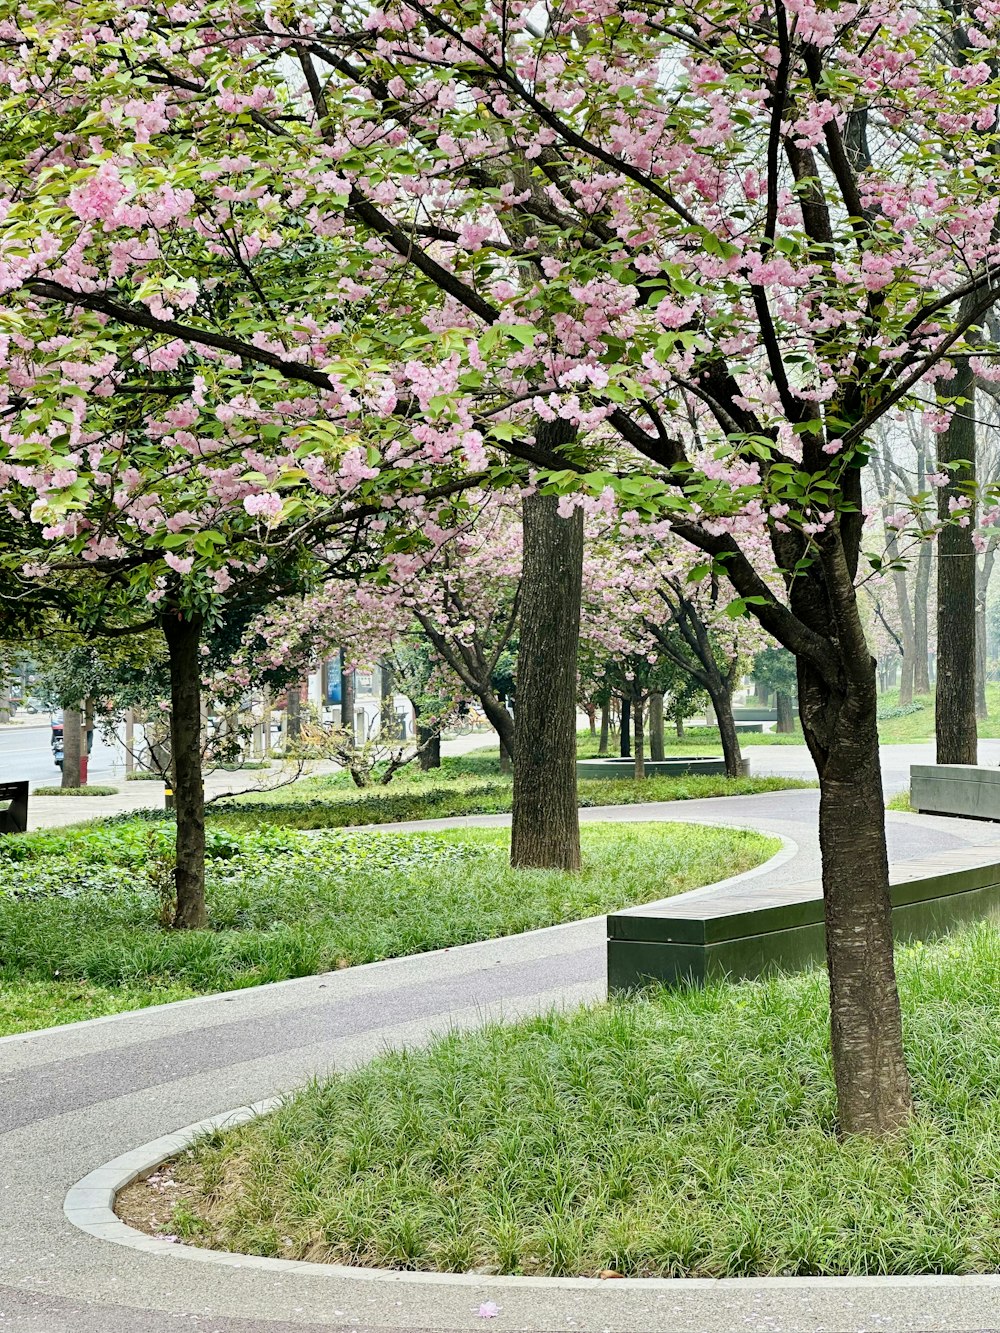 a park with benches and trees with pink flowers